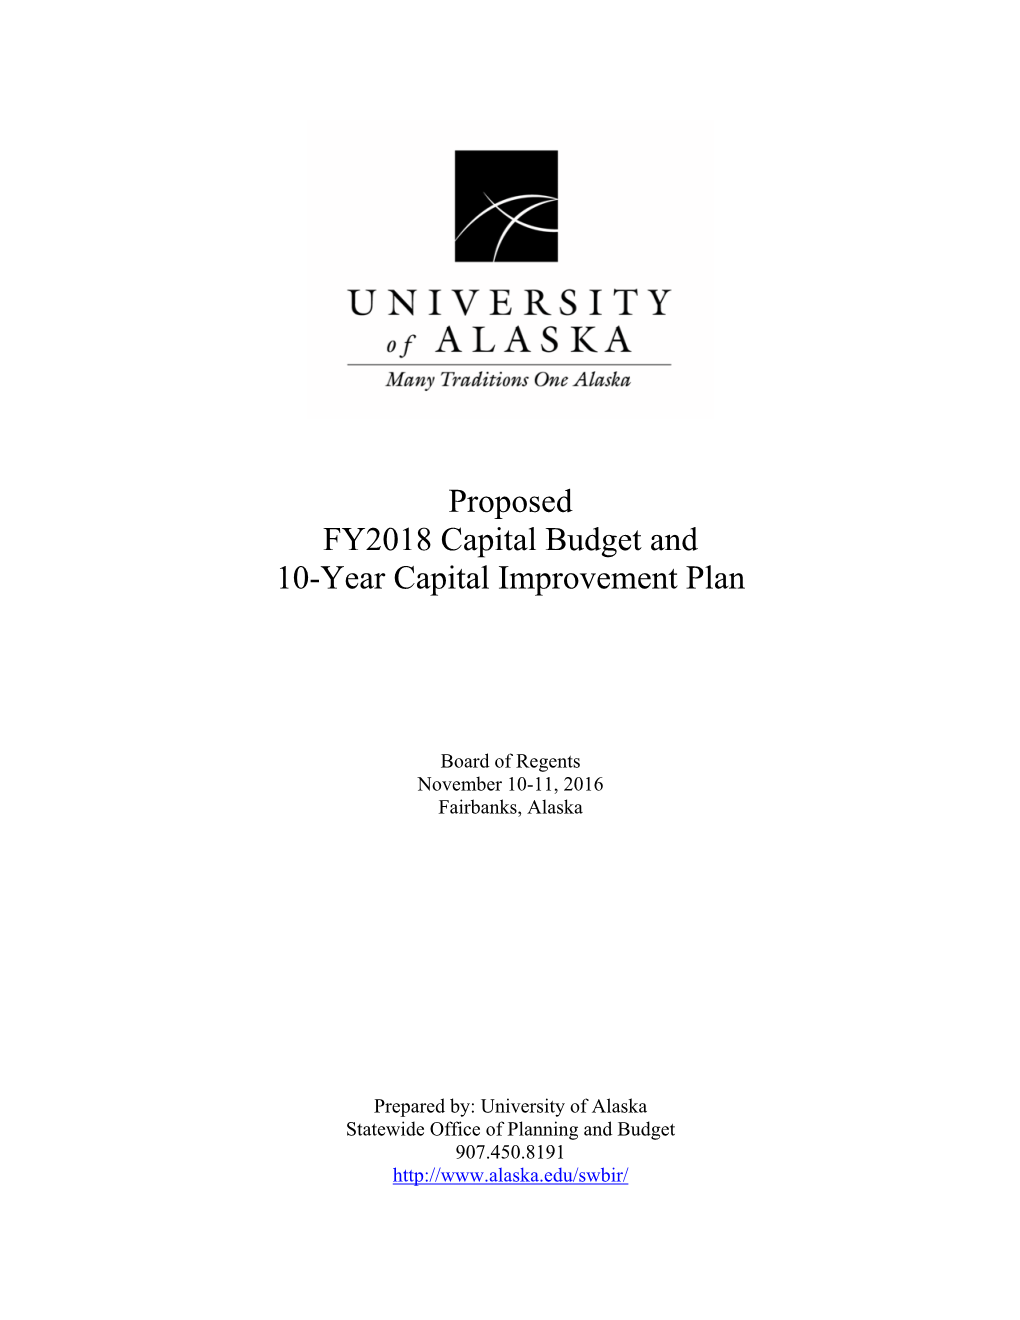 Proposed FY2018 Capital Budget and 10-Year Capital Improvement Plan